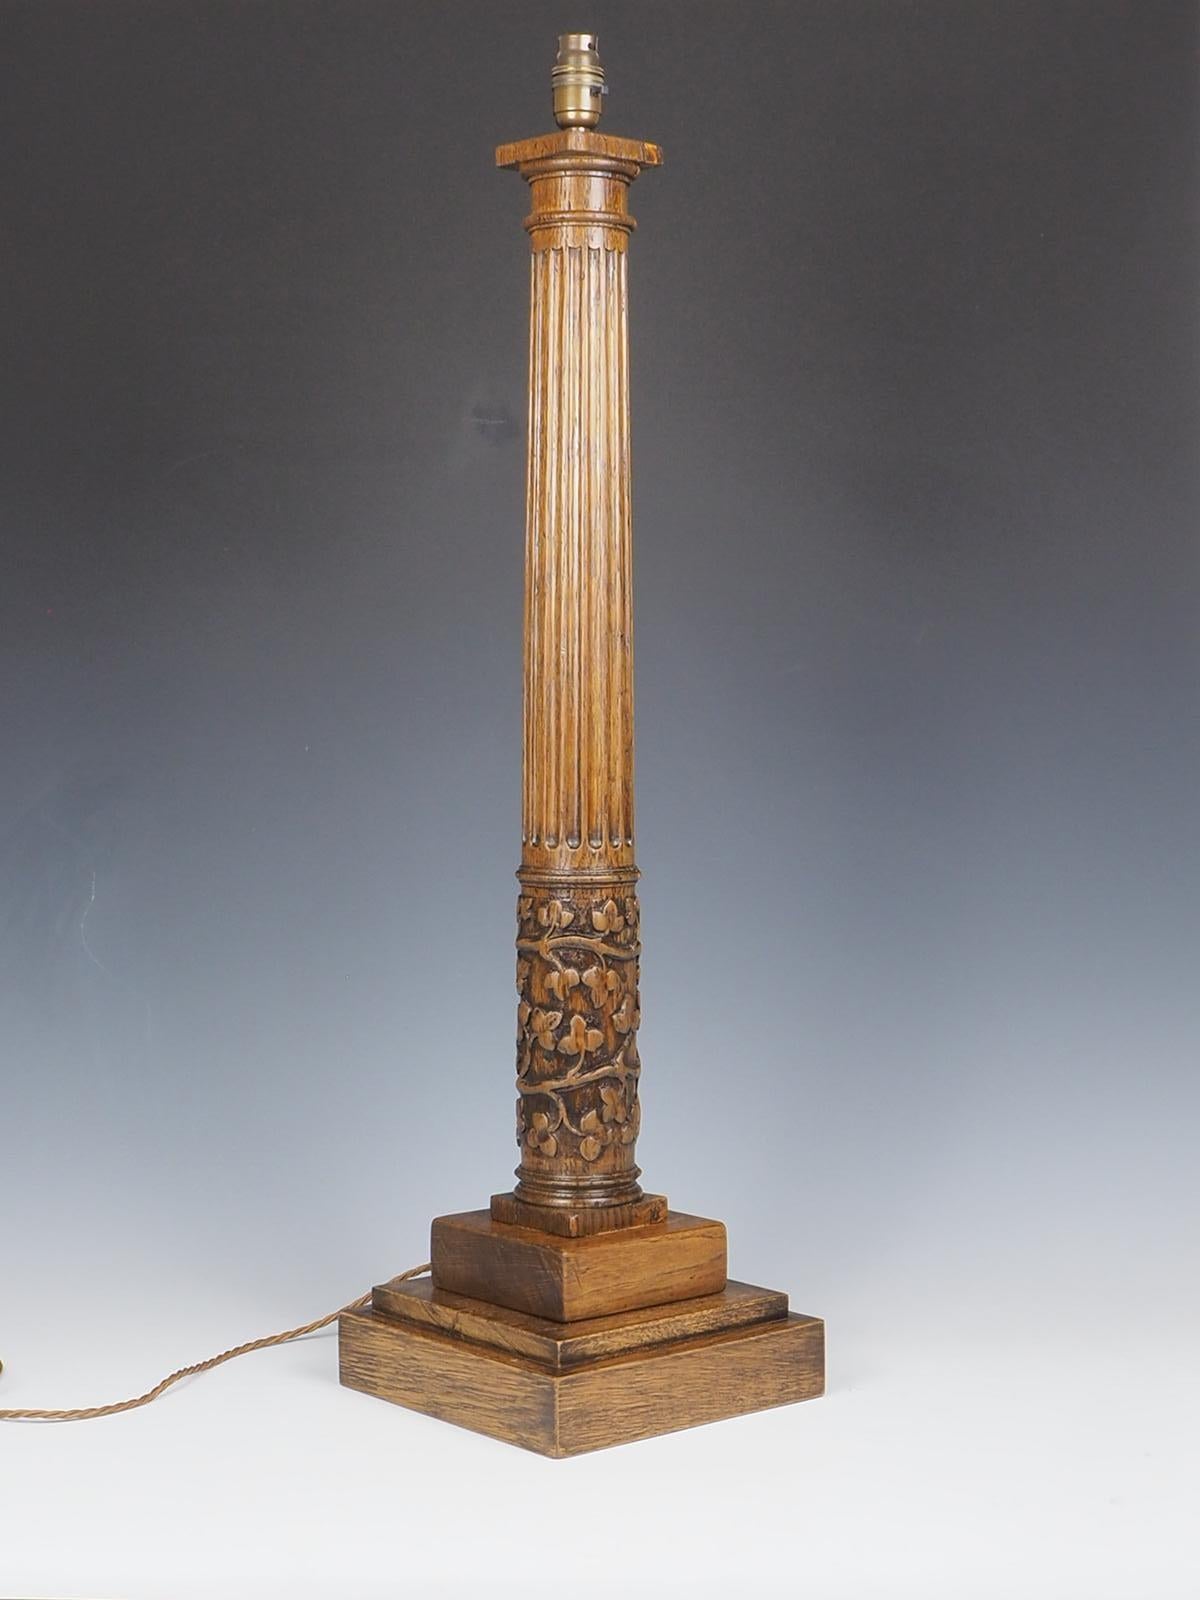 Antique Tall Oak Corinthian Table Lamp is a stunning piece that exudes elegance and sophistication. Crafted with meticulous attention to detail, this lamp features intricate carved foliage around its base. The lamp’s stepped base leads up to a